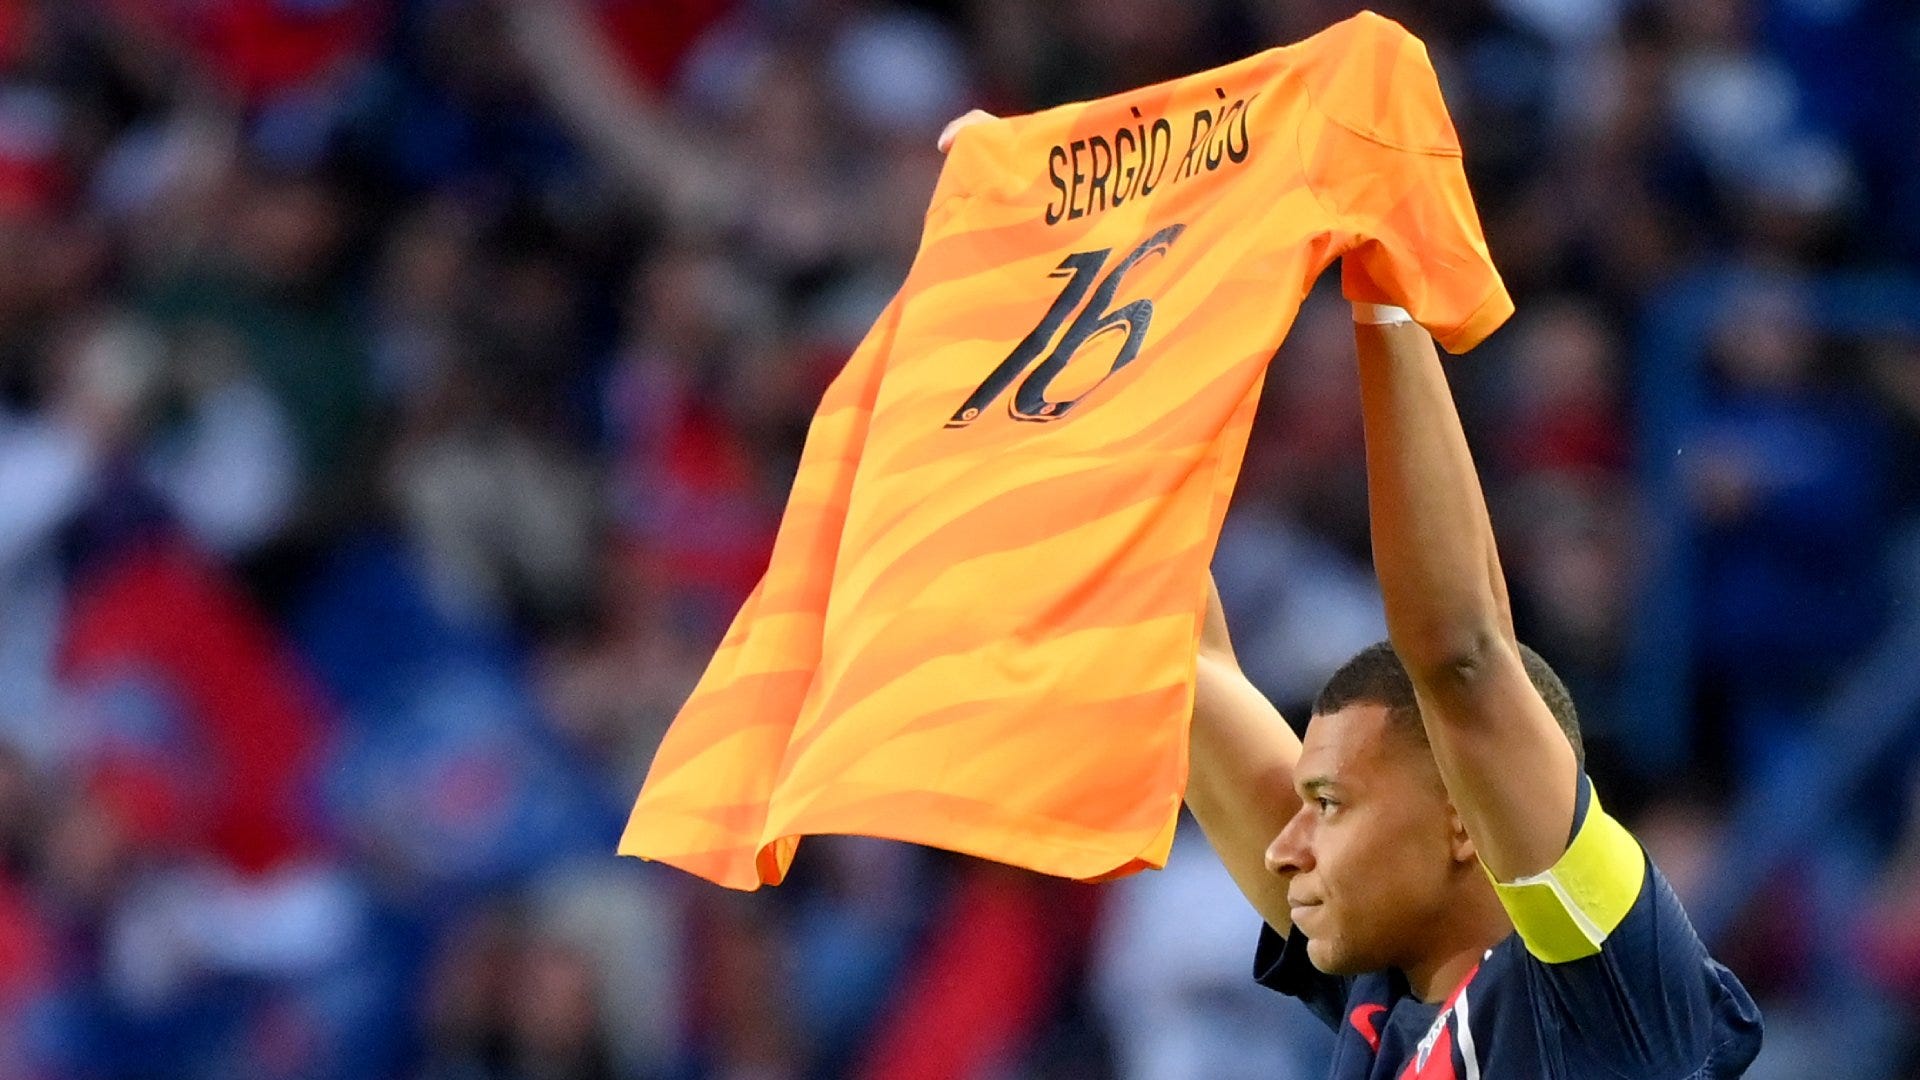 Kylian Mbappe and Paris Saint-Germain pay tribute to Sergio Rico in final Ligue 1 game of the season